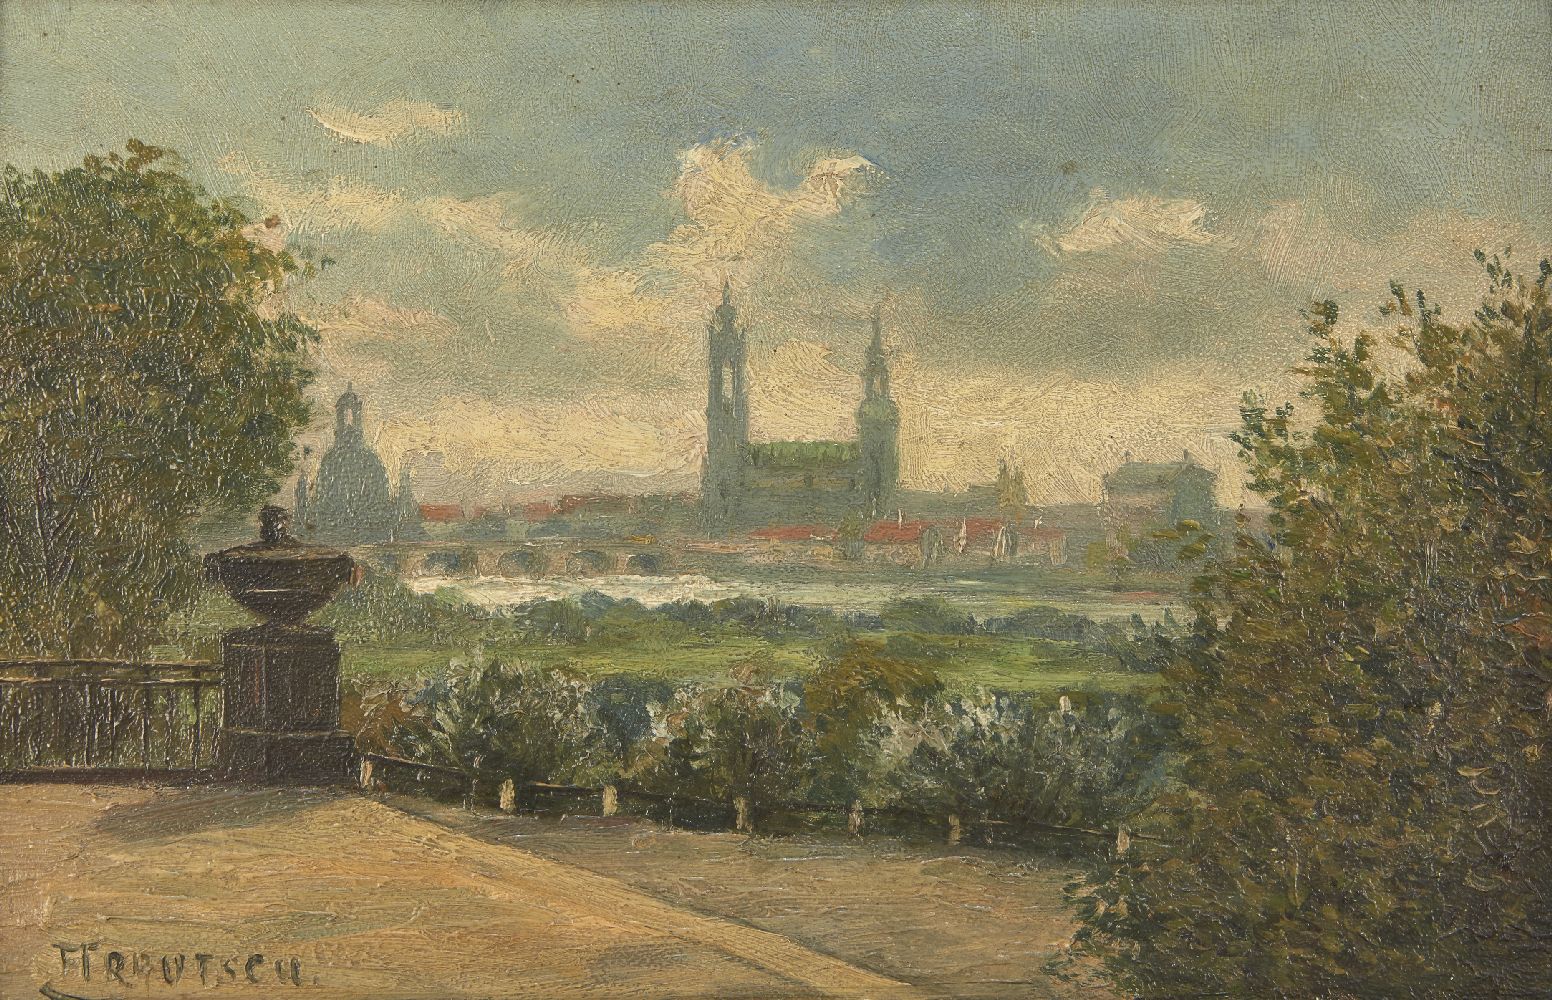 Franz Trautsch, German 1866 - 1920- View of a city; oil on board, signed lower left, 18 x 27cm